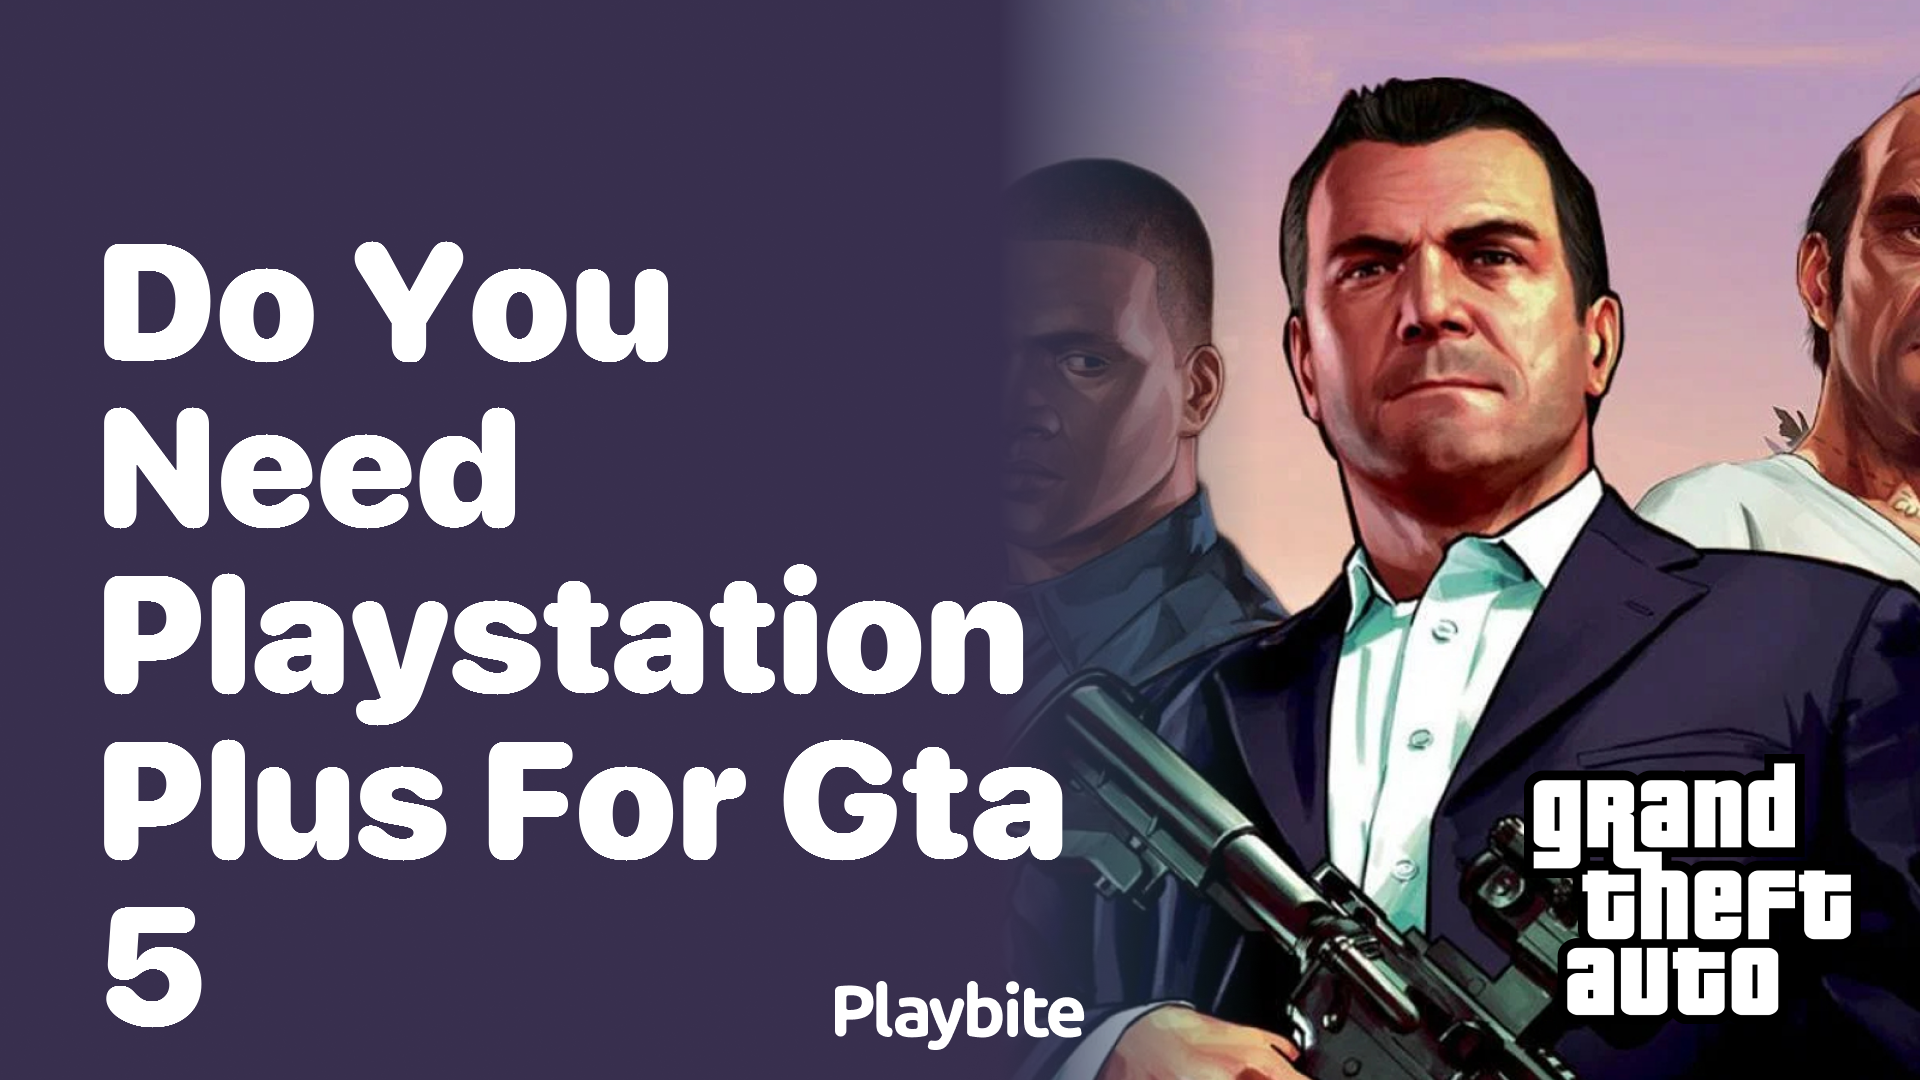 Do you need PlayStation Plus for GTA 5?